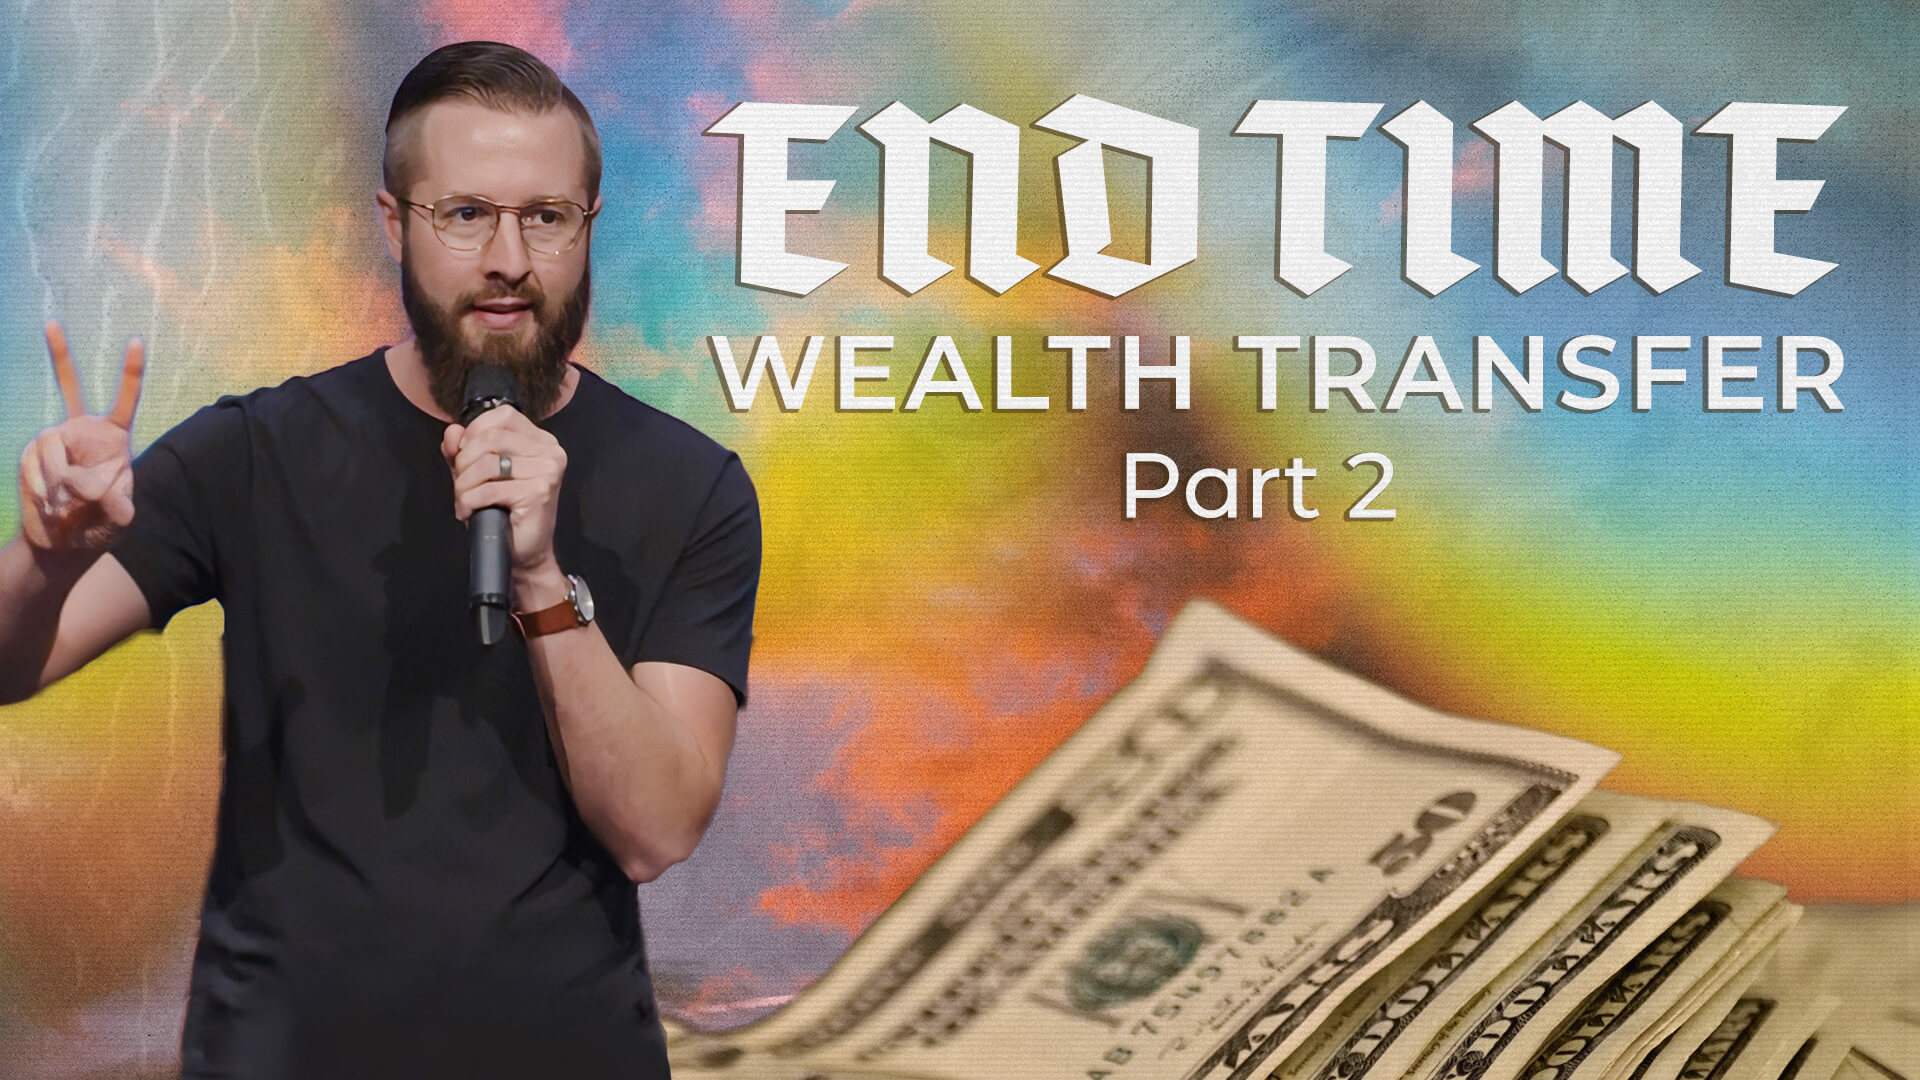 Preparing for End-Time Wealth